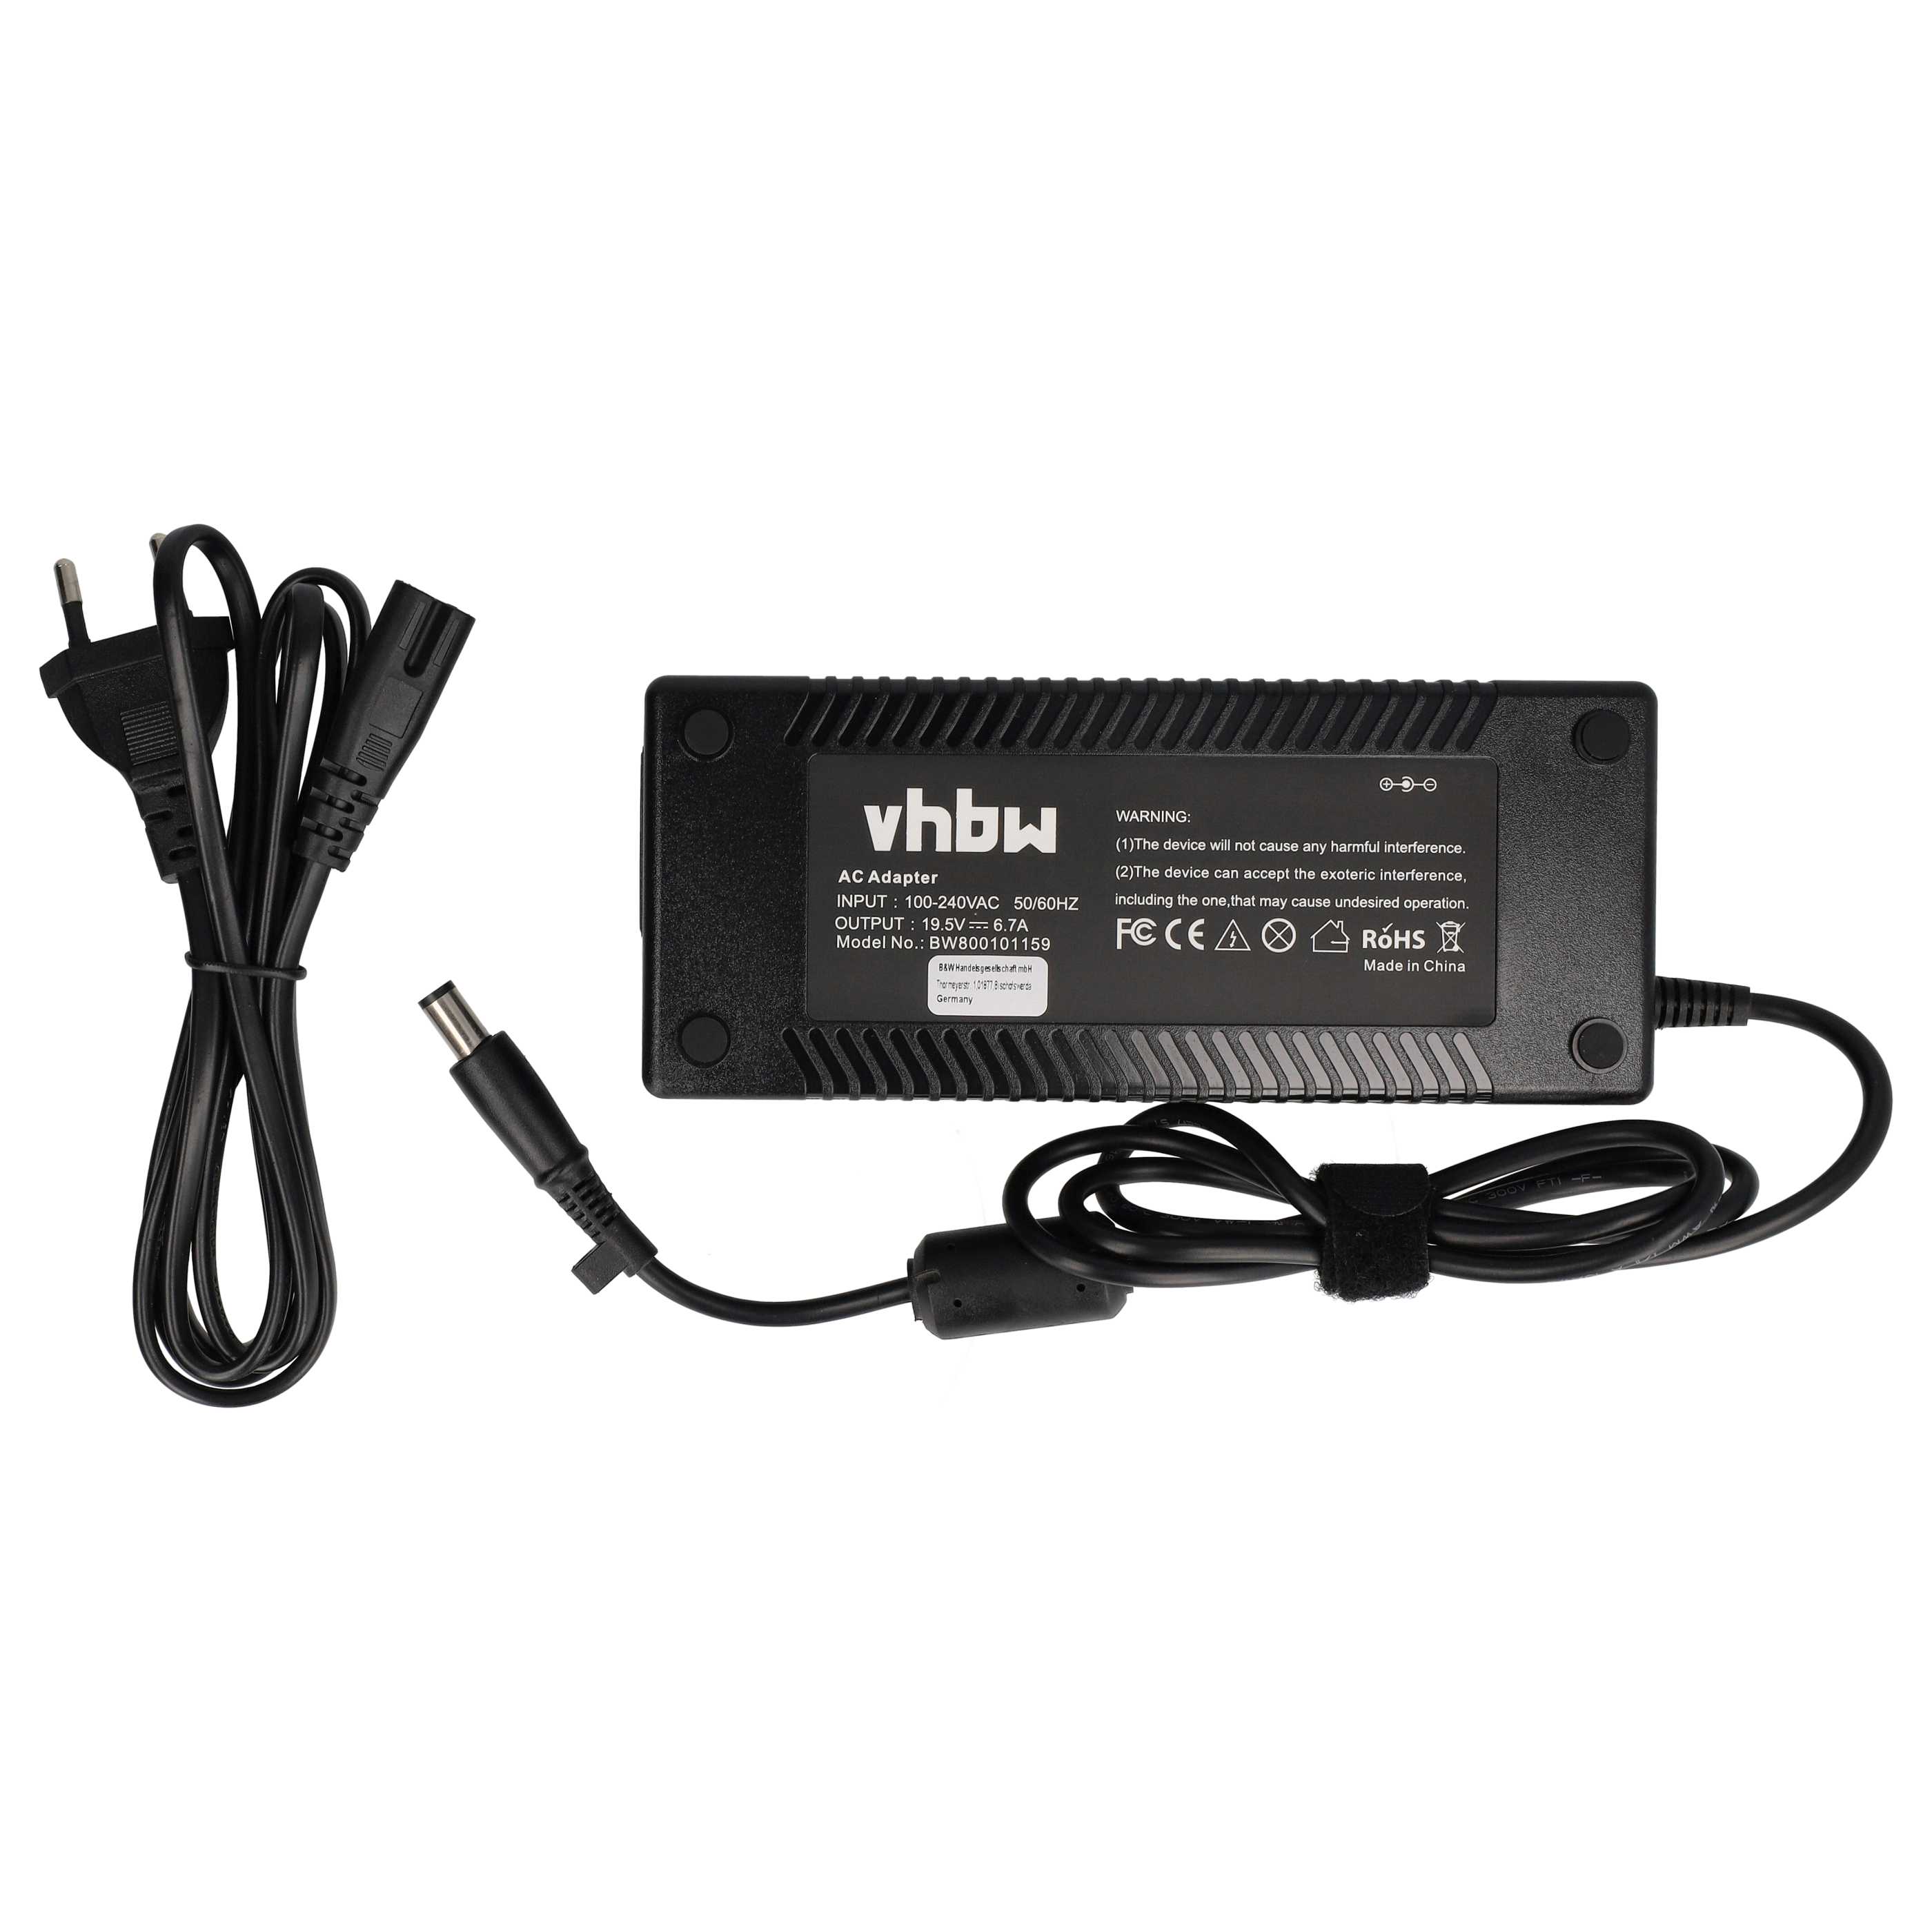 Mains Power Adapter replaces Dell PA-1131-02D for DellNotebook, 131 W